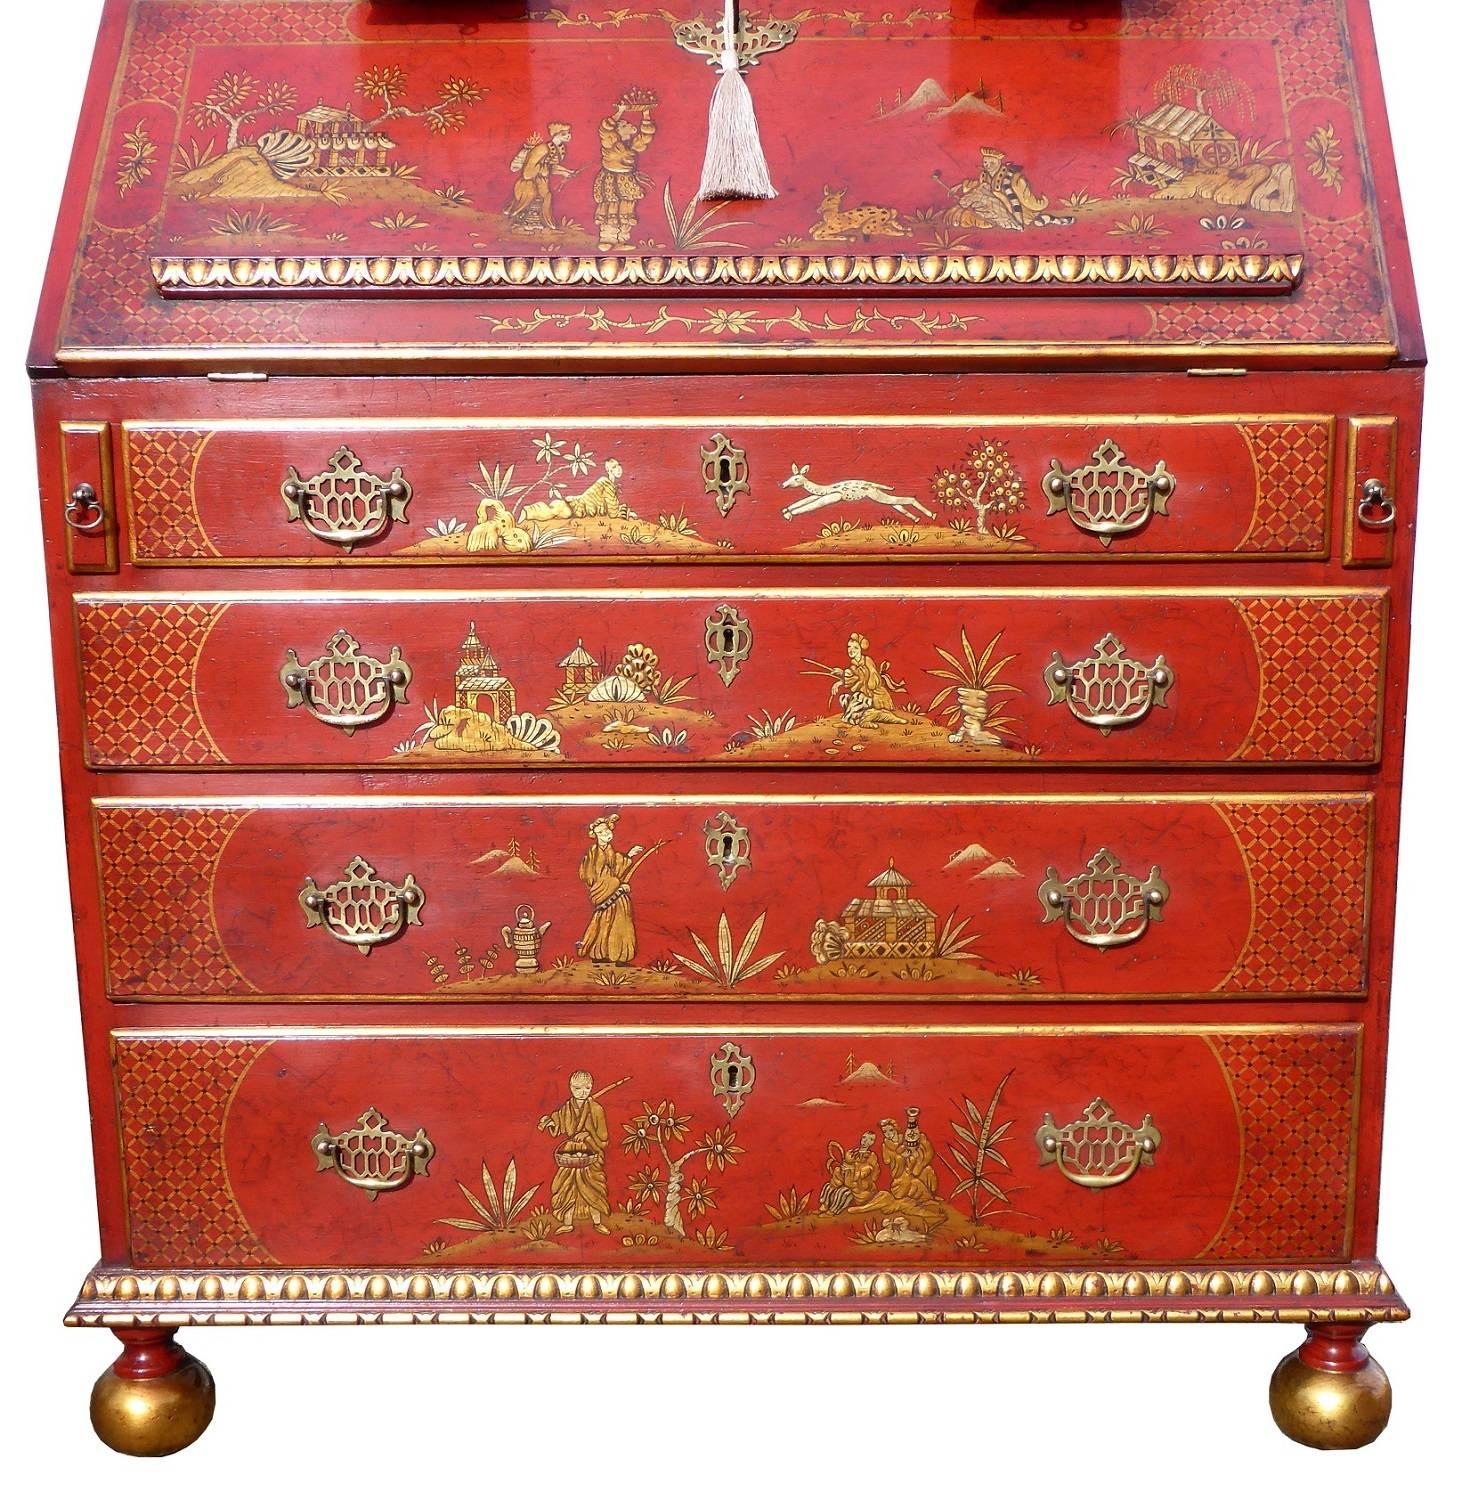  Late 19th/Early 20th Century Lacquer and Gilt Chinoiserie Secretary Bookcase 3